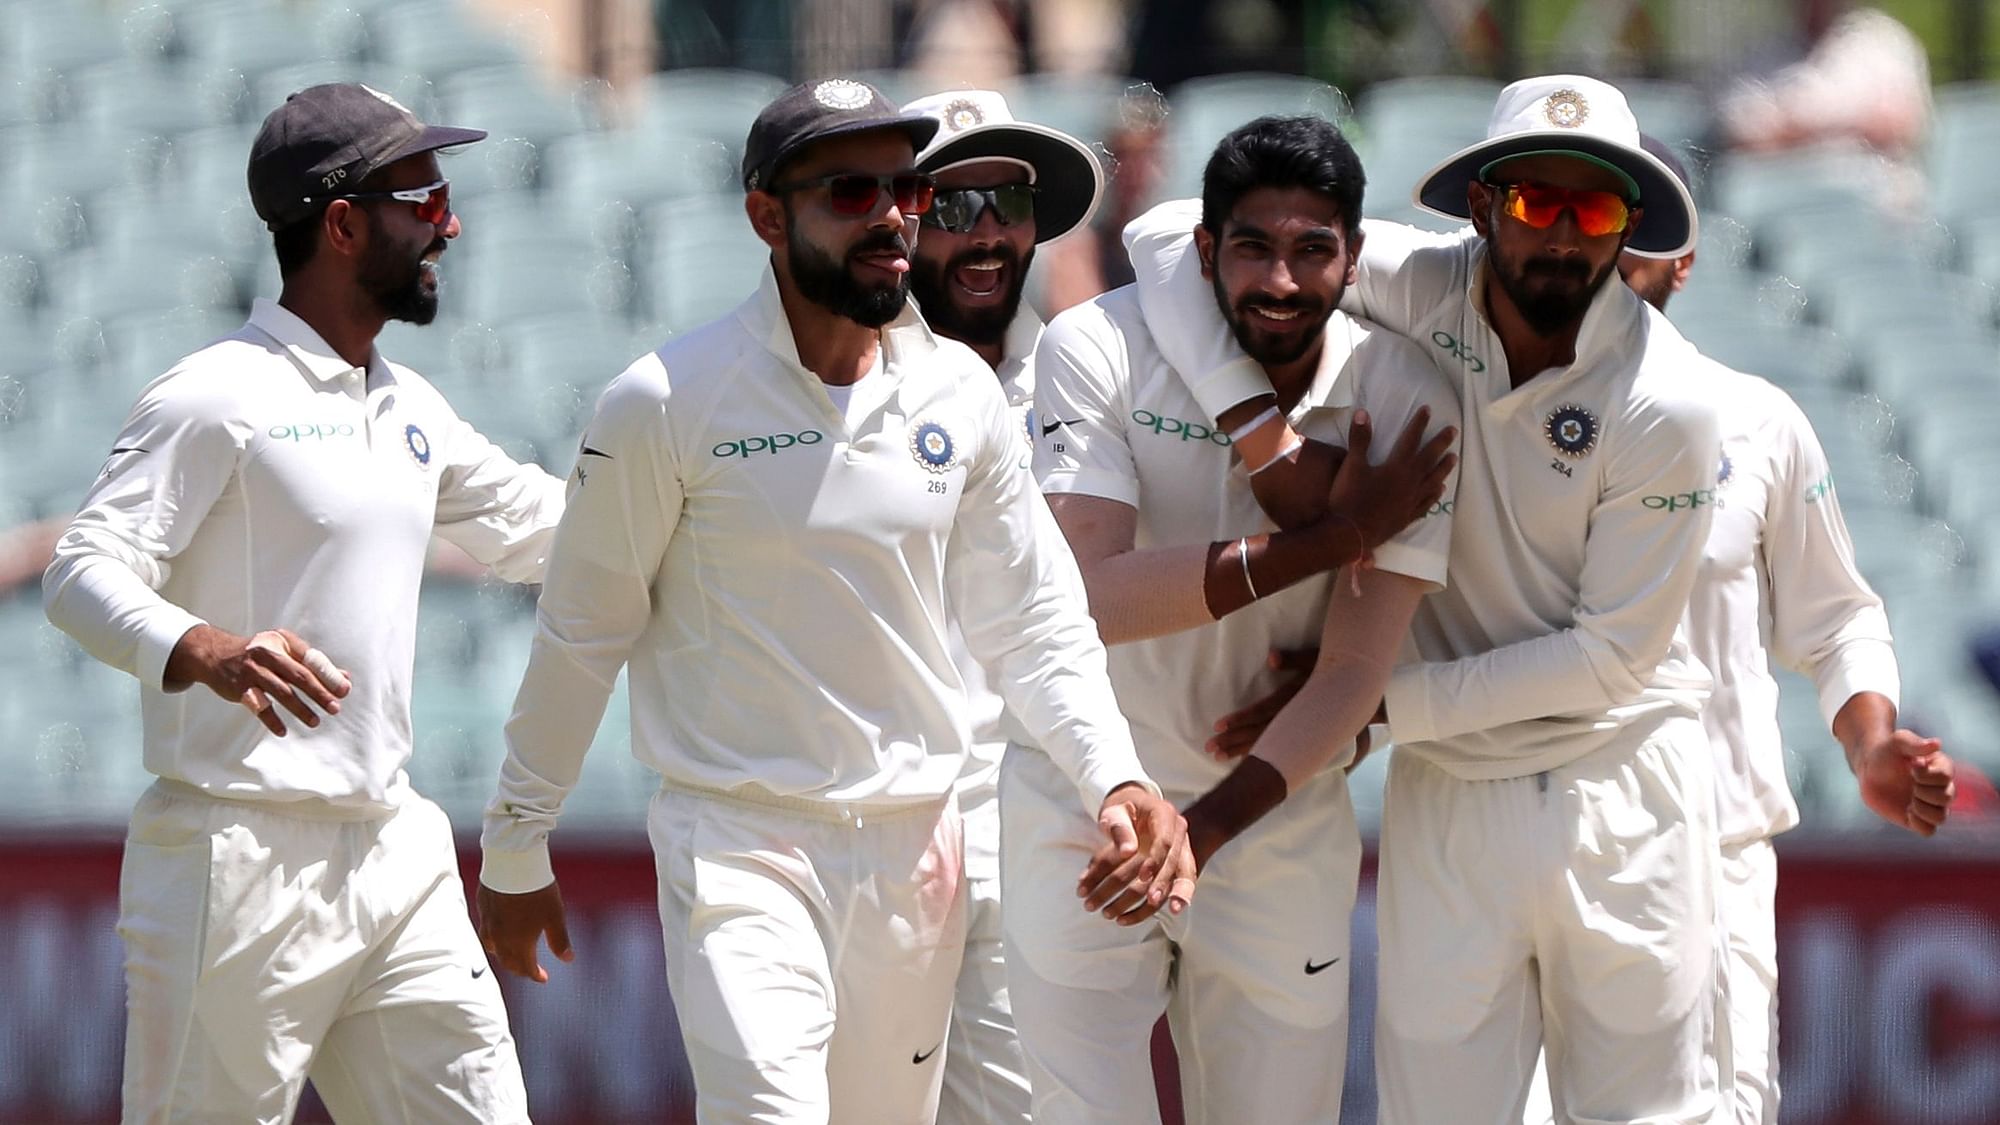 India’s Jasprit Bumrah, second right, is congratulated by teammates after dismissing Australia’s Shaun Marsh during the first cricket Test between Australia and India.